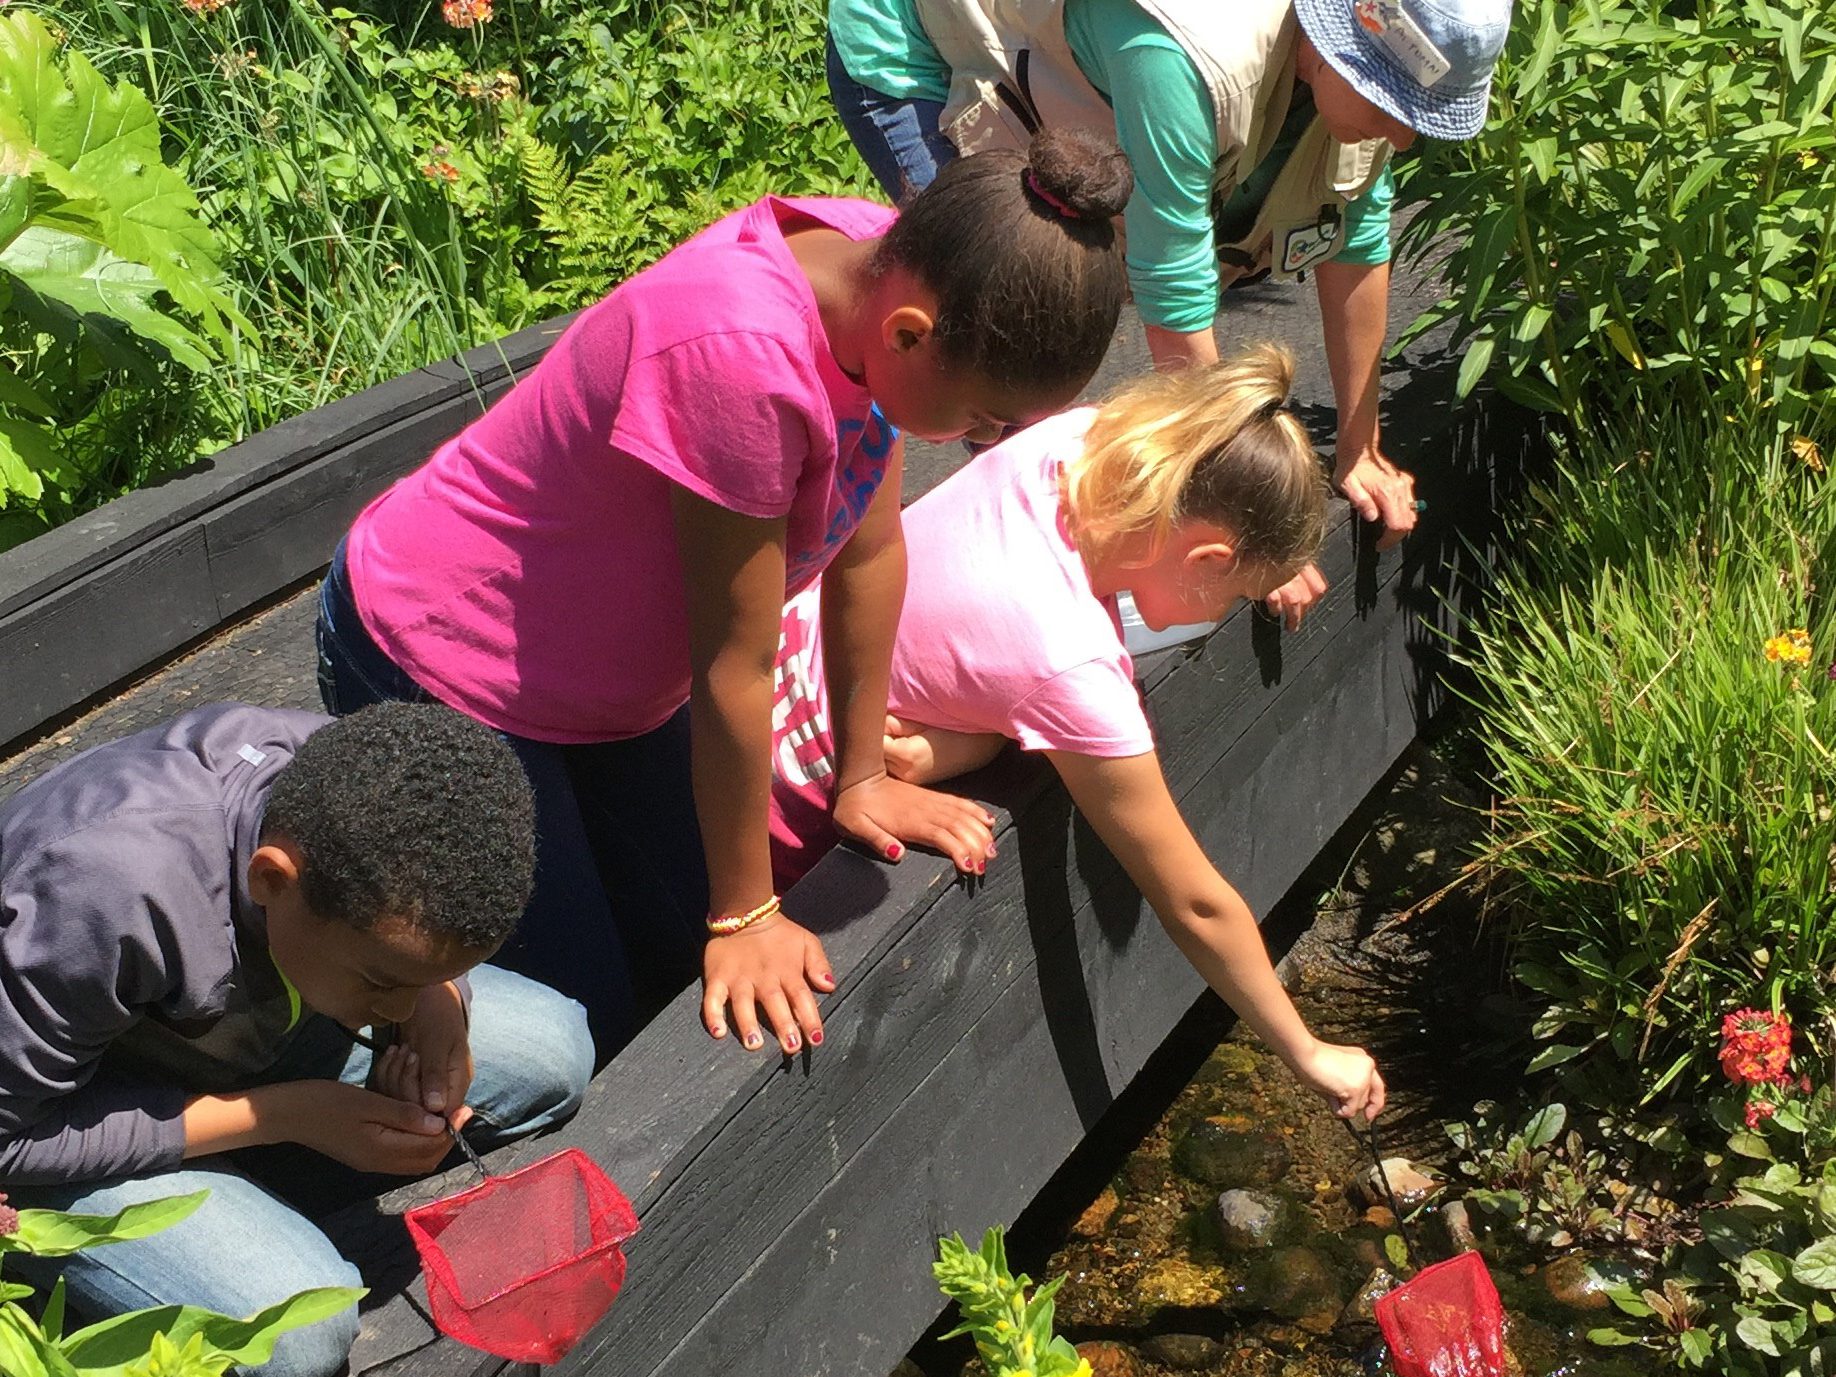 Star Lake Elementary and Totem Middle School students work with the Environmental Science Center to sample macroinvertebrates at a field study site in Washington state as part of a 2017 NOAA-21st CCLC Watershed STEM Education Partnership Grant. (Image credit: Environmental Science Center)